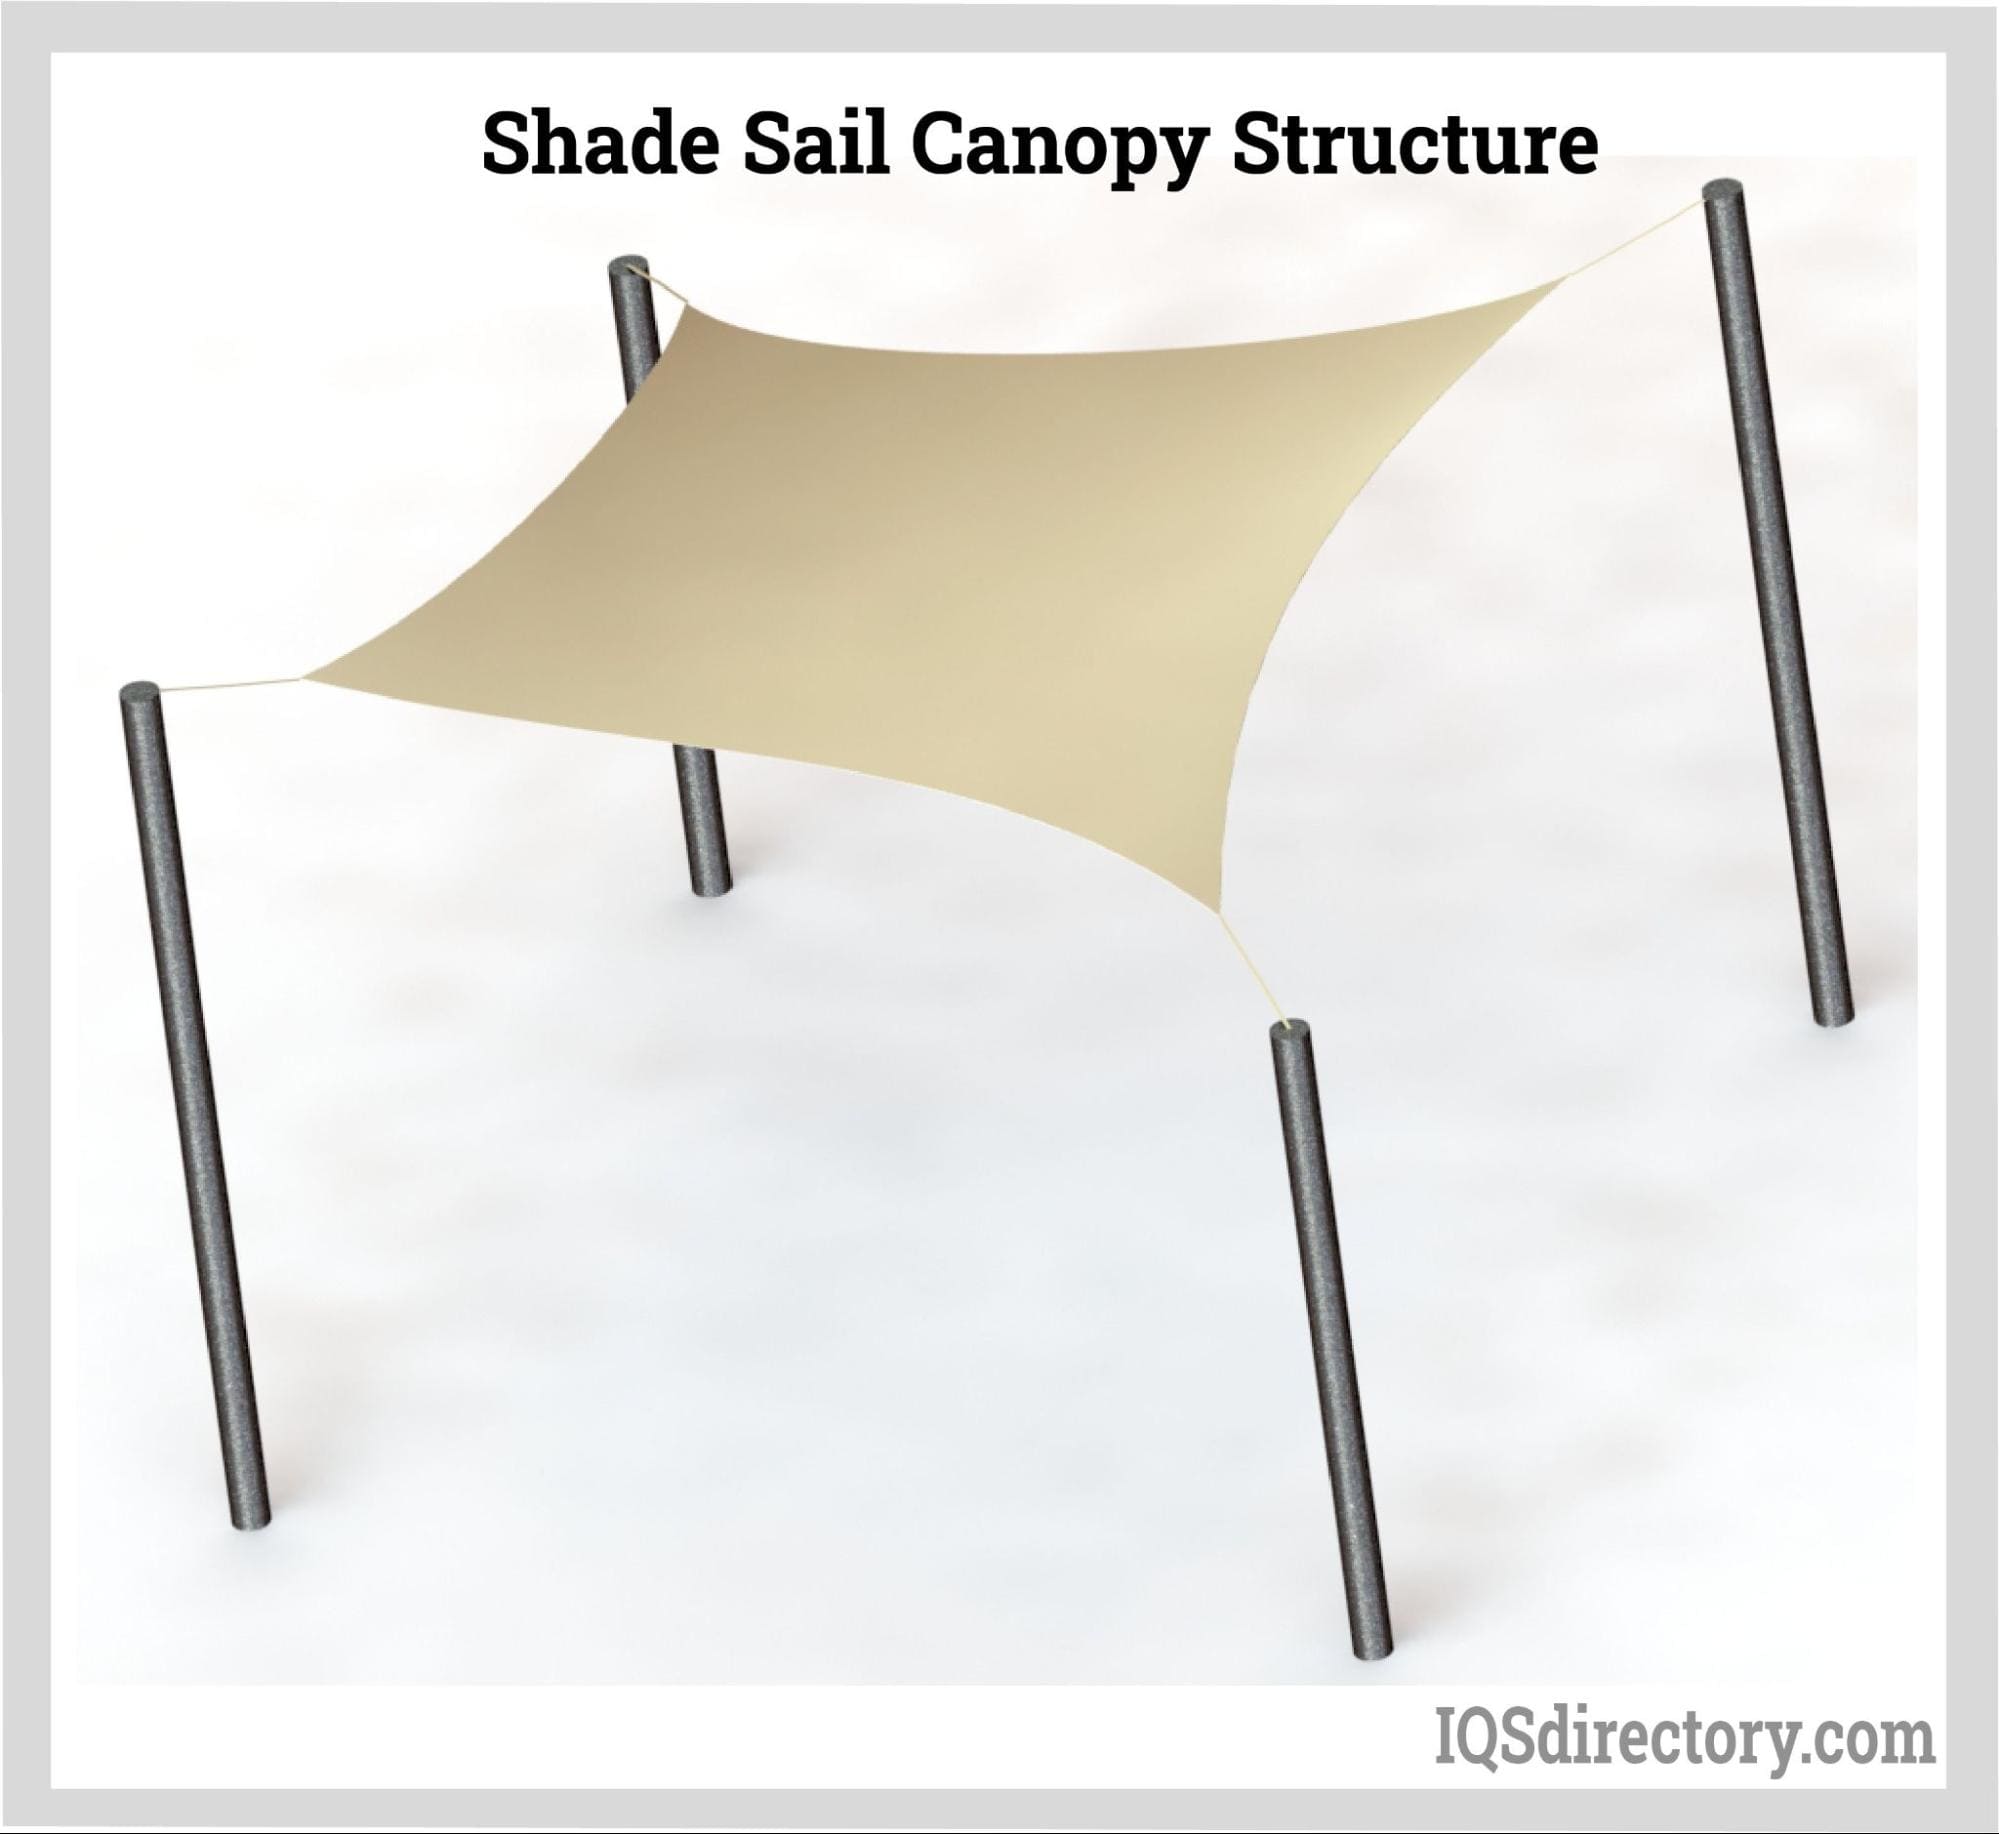 Shade Sail Canopy Structure